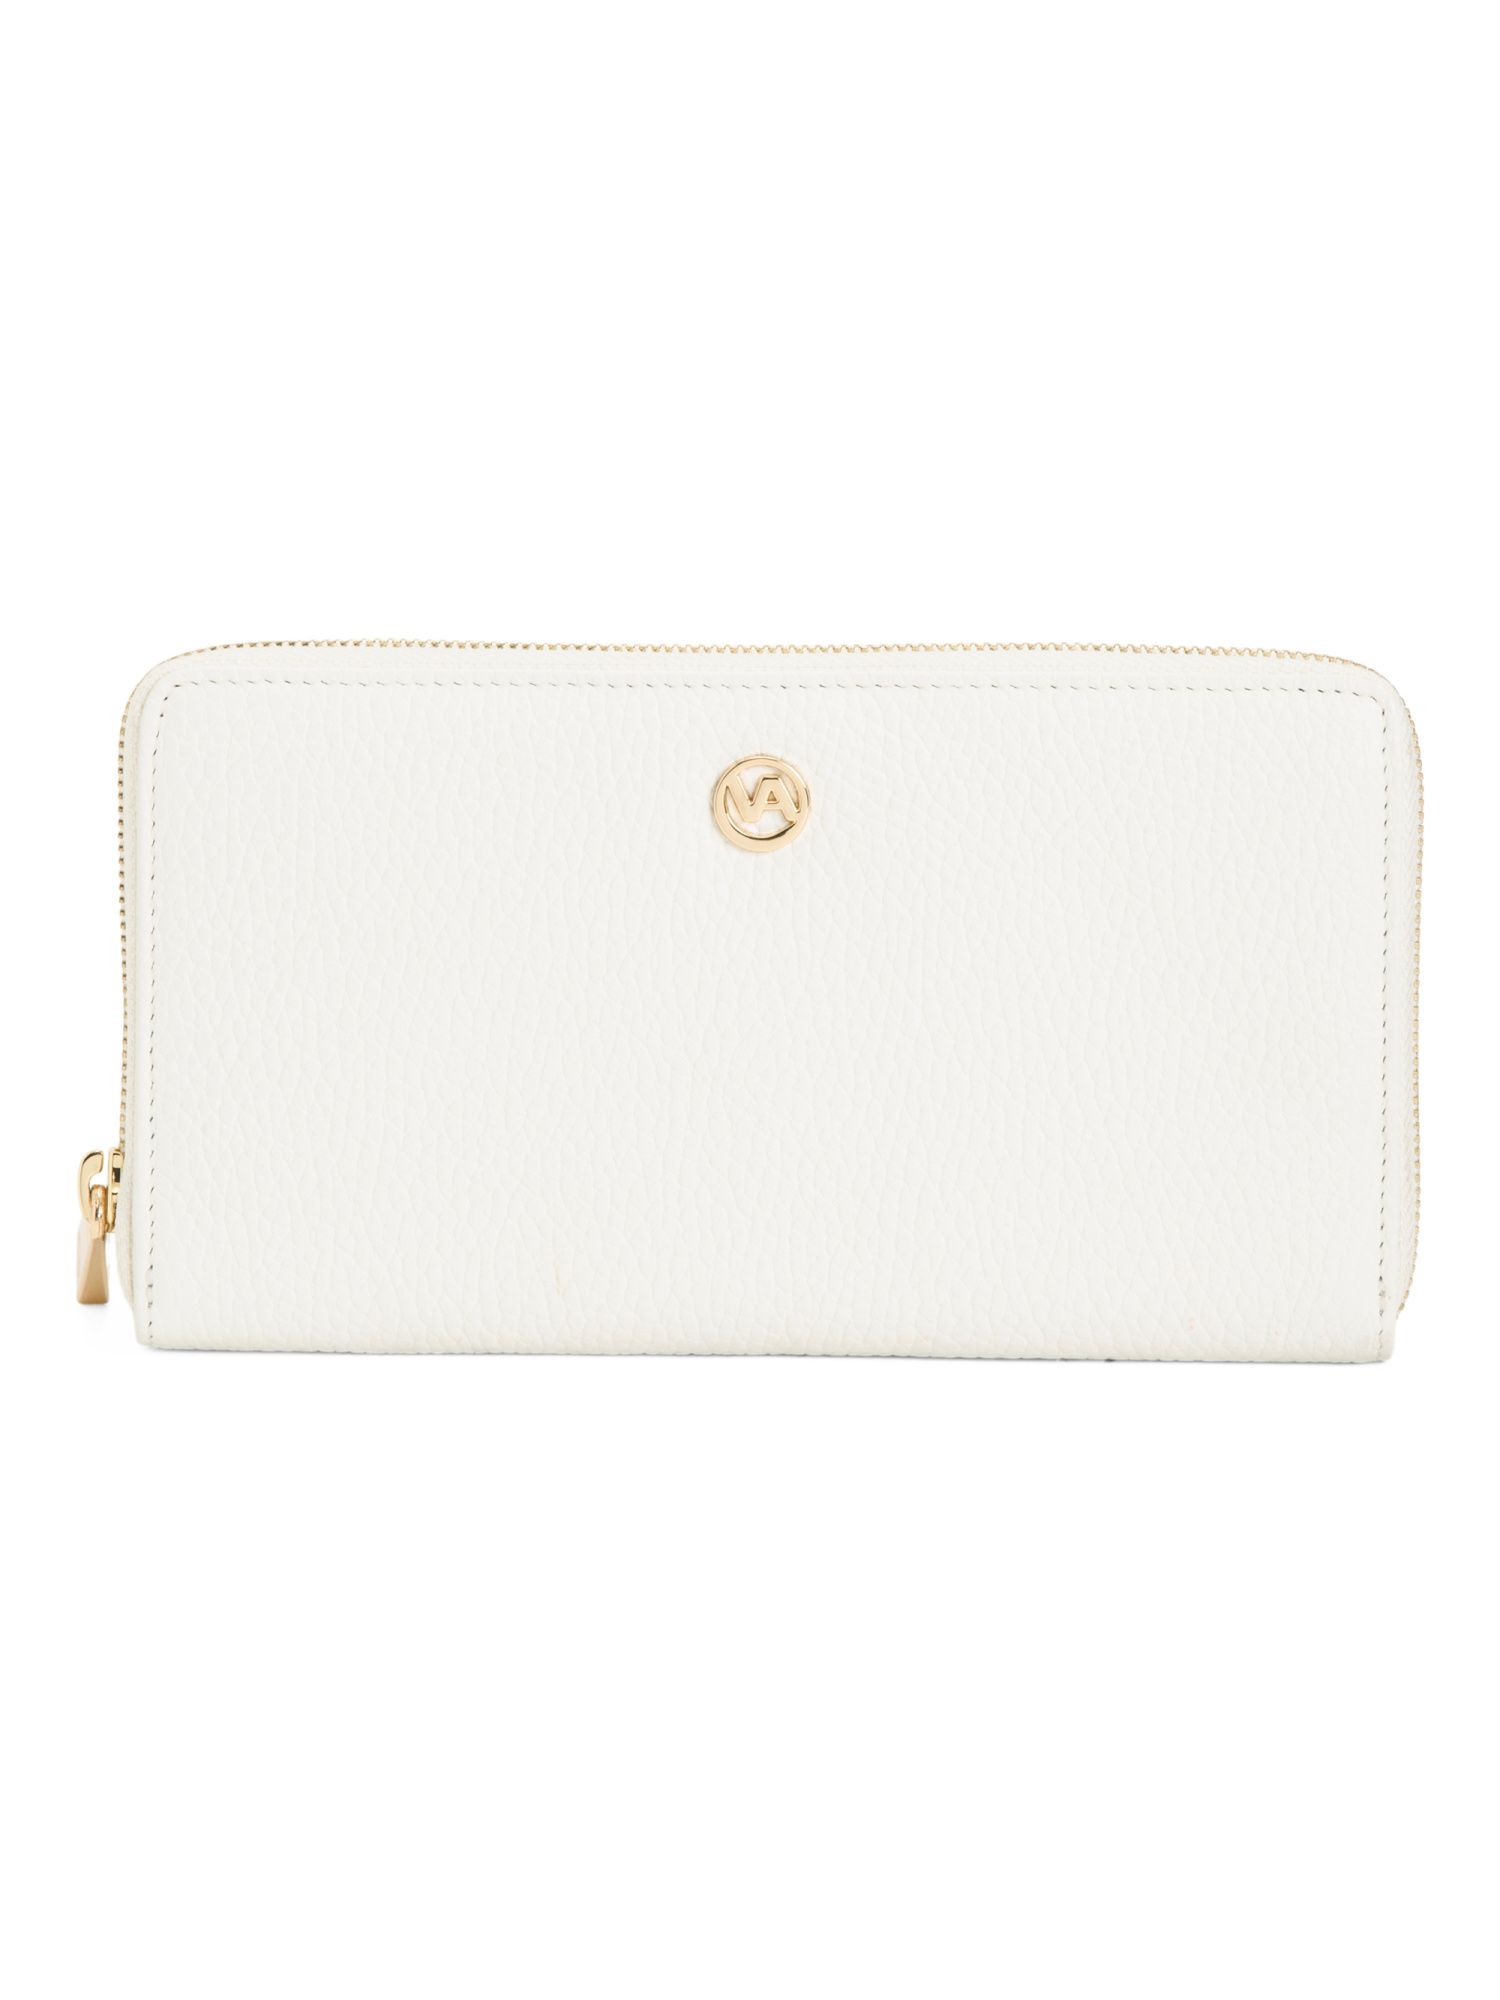 Made In Italy Leather Zip Around Wallet | TJ Maxx